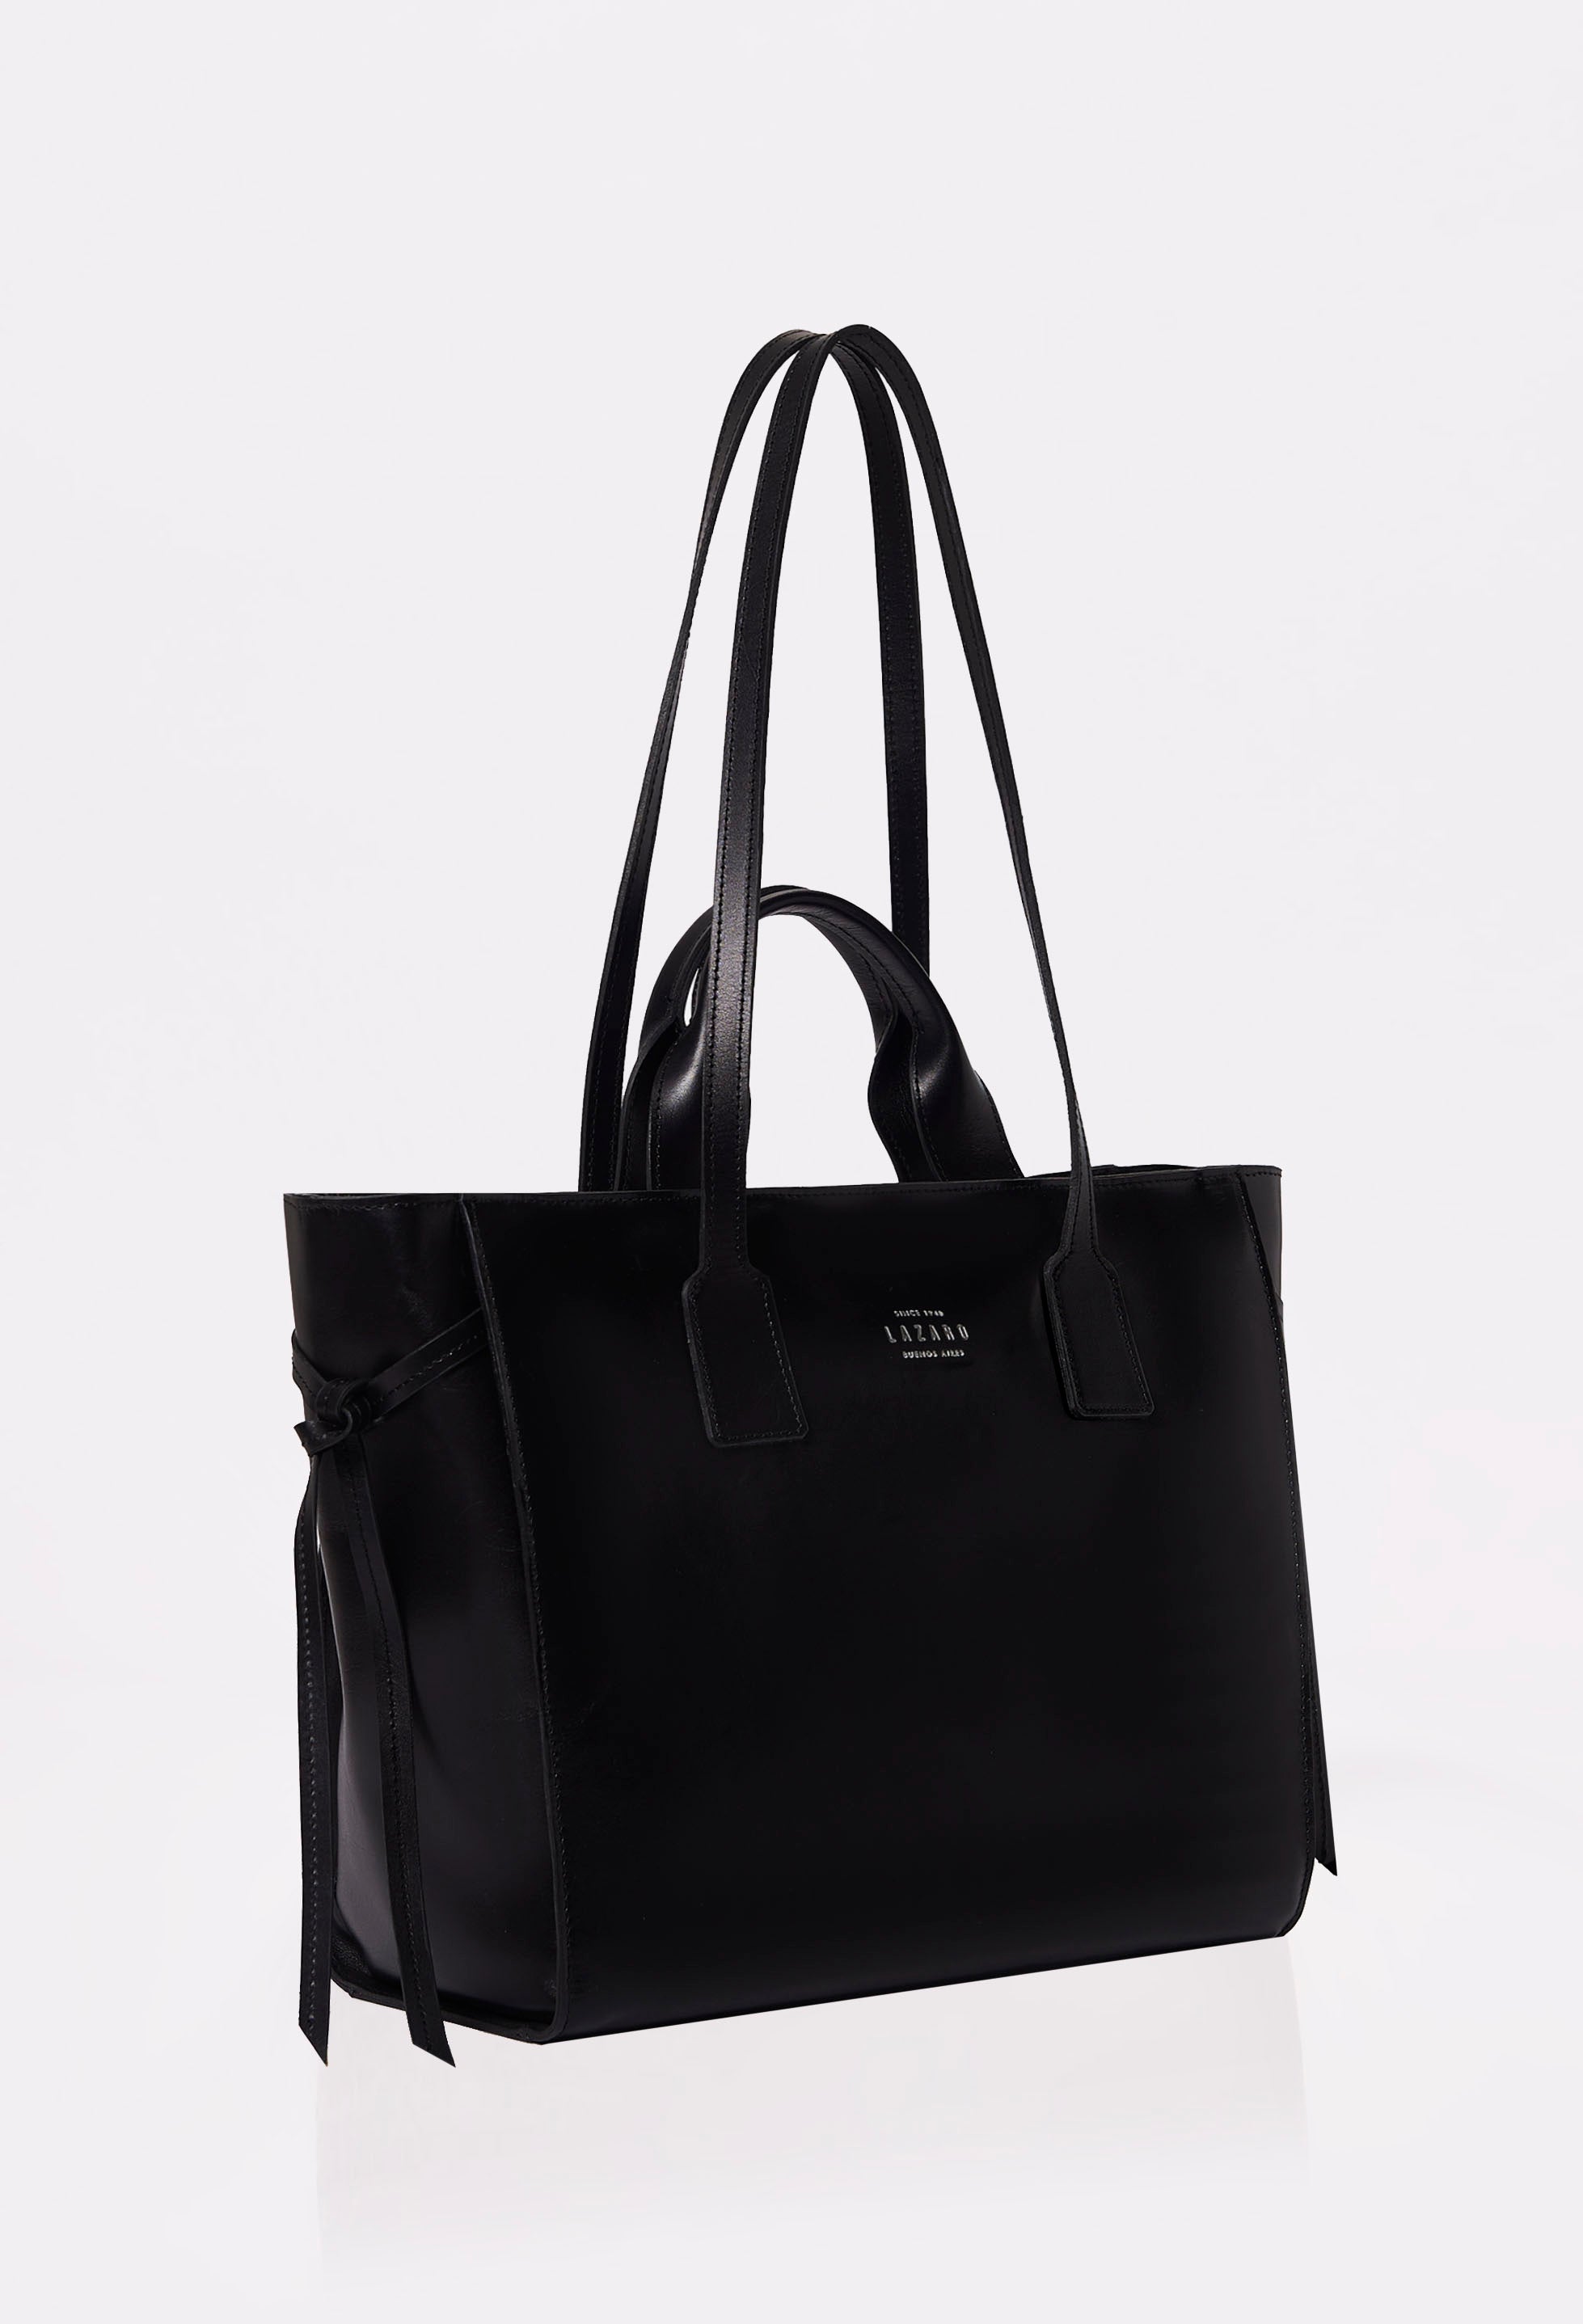 Side of a Black Leather Tote Bag Lambro with Lazaro logo, leather handle and straps and decorative knots on the sides.